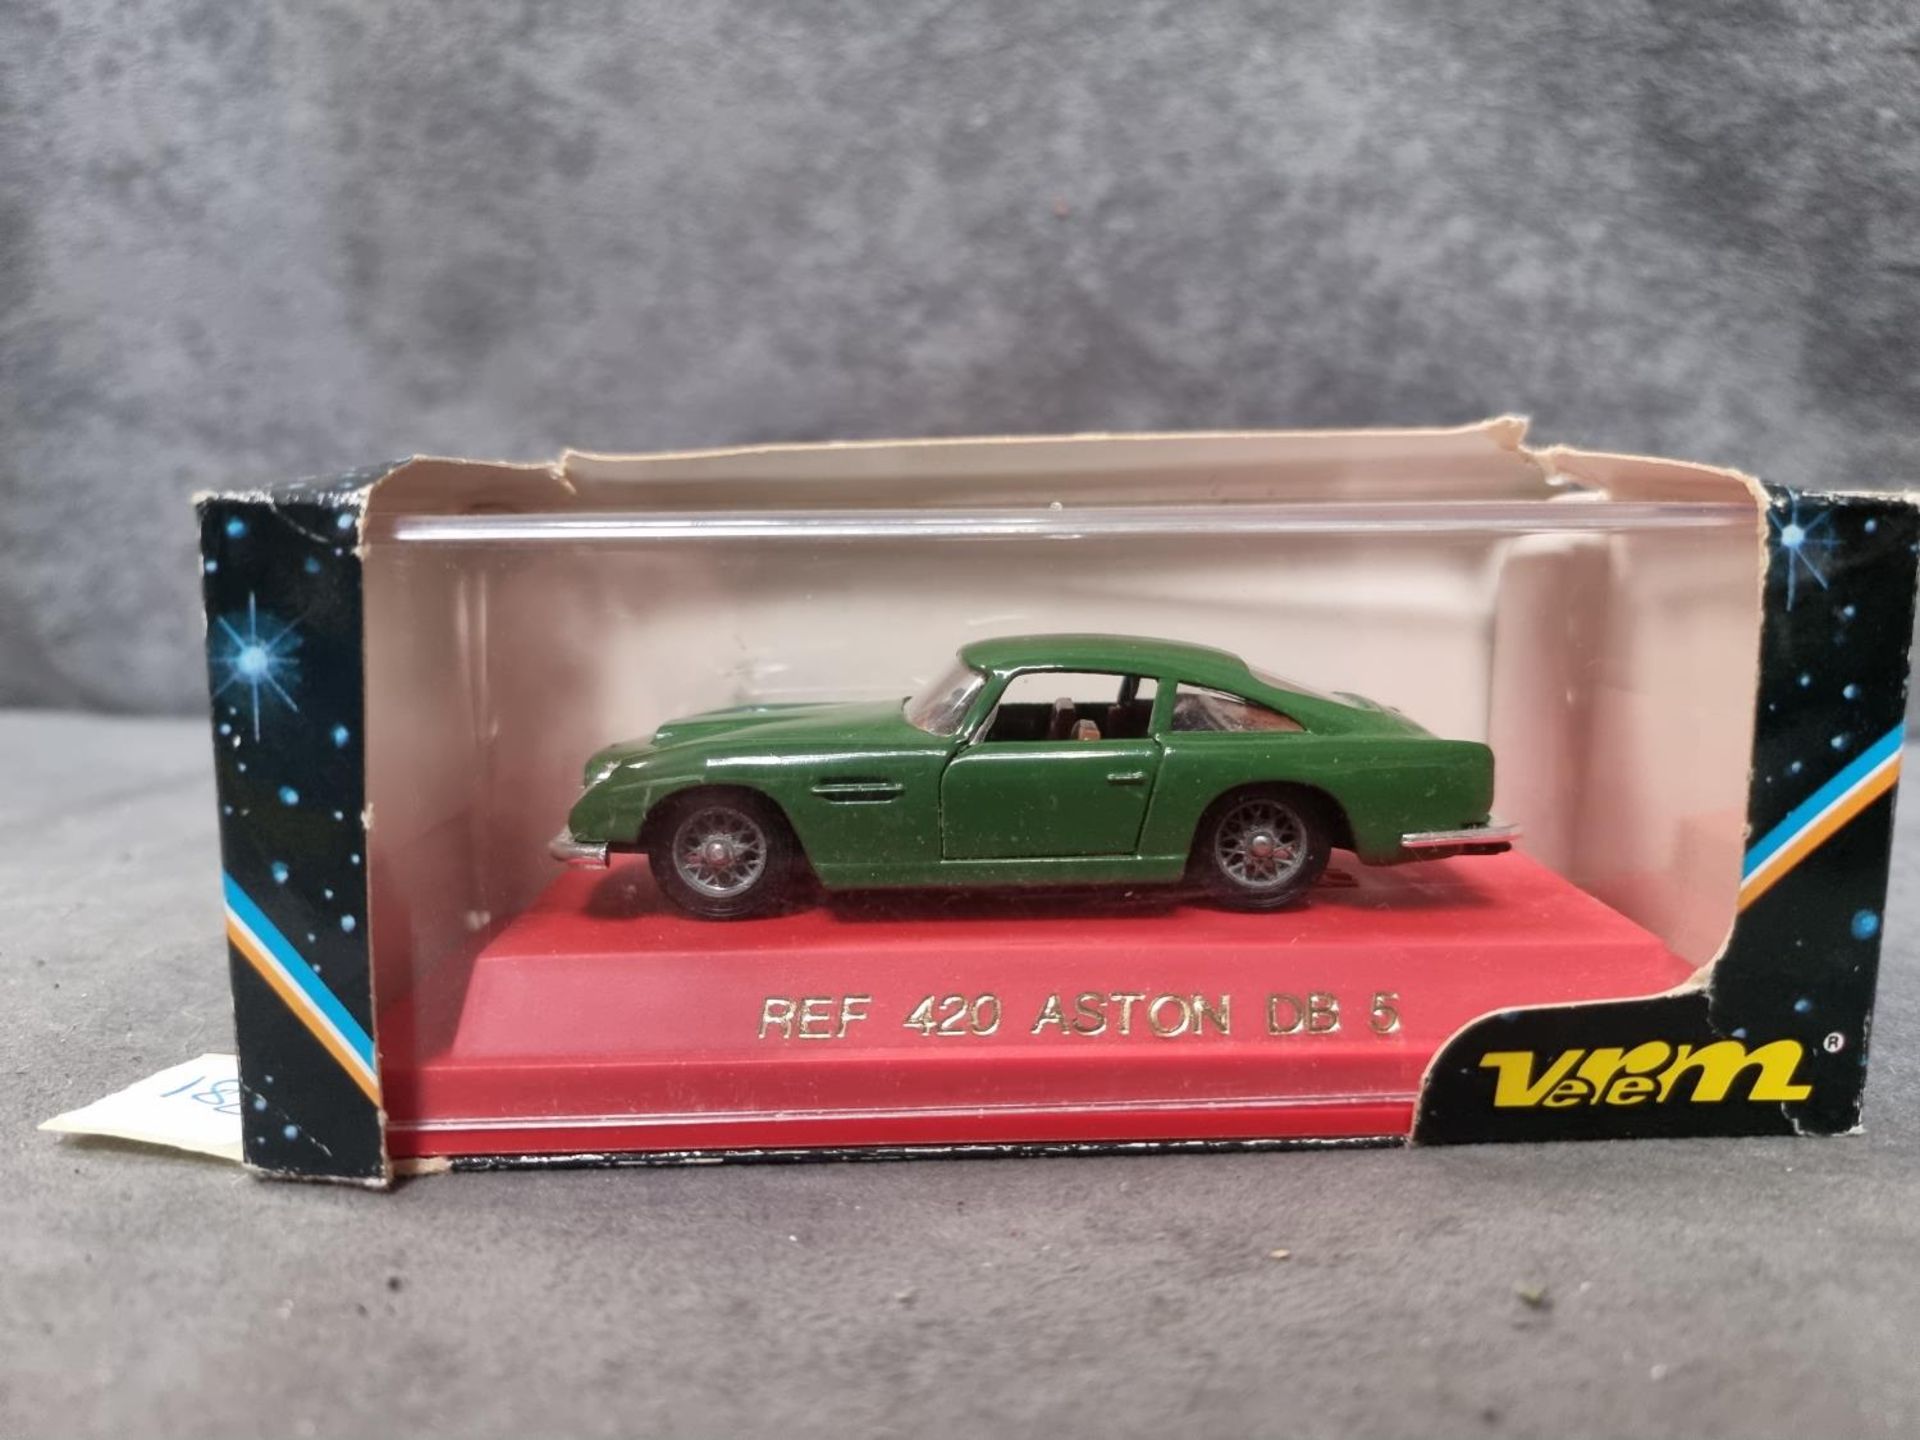 Verem #420 Aston DB5 Green With Brown Interior Diecast 1/43 Scale Model In Acrylic Case Verem Was